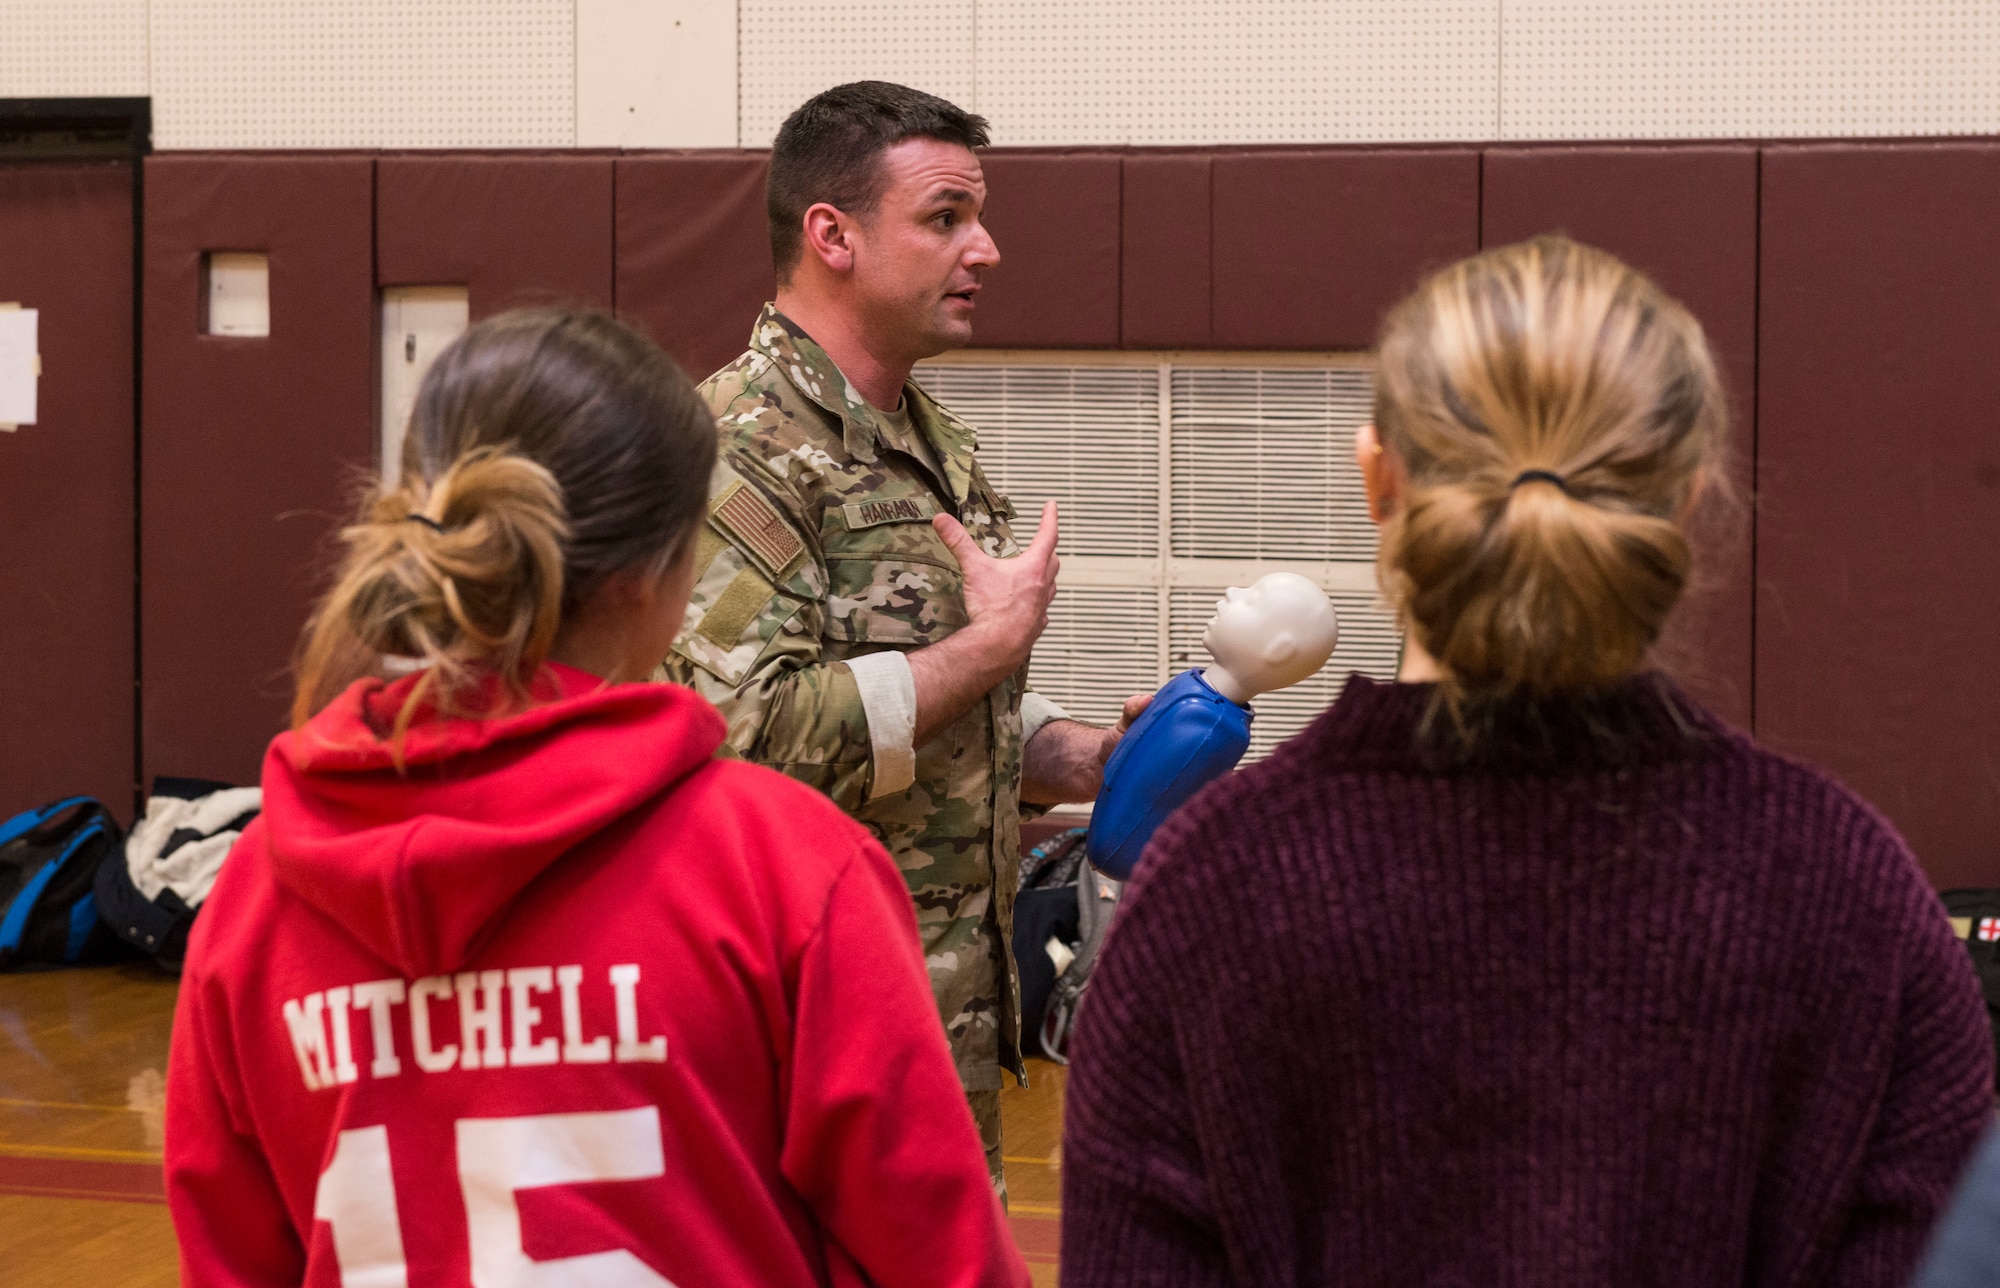 Master Sgt. Darrel Hanrahan, an Aerospace Medical Technician assigned to the 103rd Medical Group, helps teach a CPR class at Torrington High School,  Torrington, Conn., March 22. Airmen from the 103rd Medical Group volunteered to help students meet requirements for their physical education class. (U.S. Air National Guard photo by Staff Sgt. Steven Tucker)